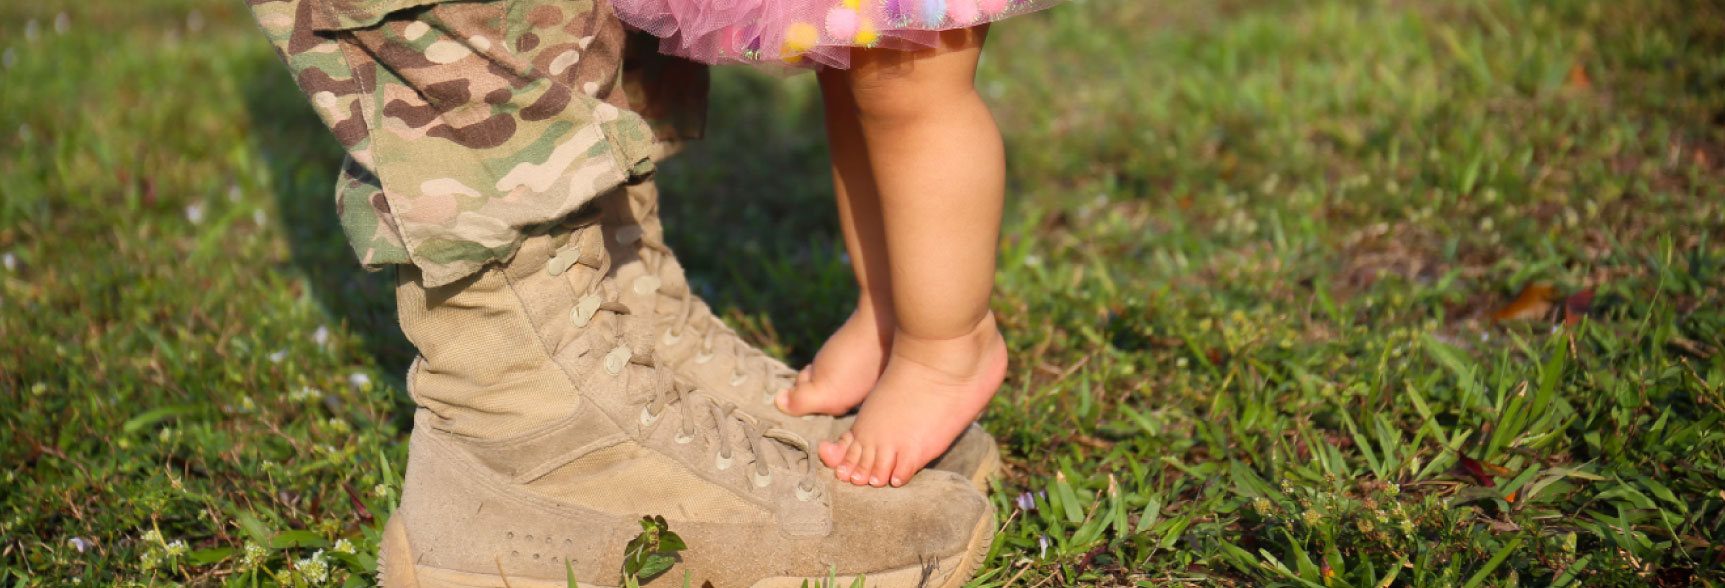 toddler standing on per dad's military boots